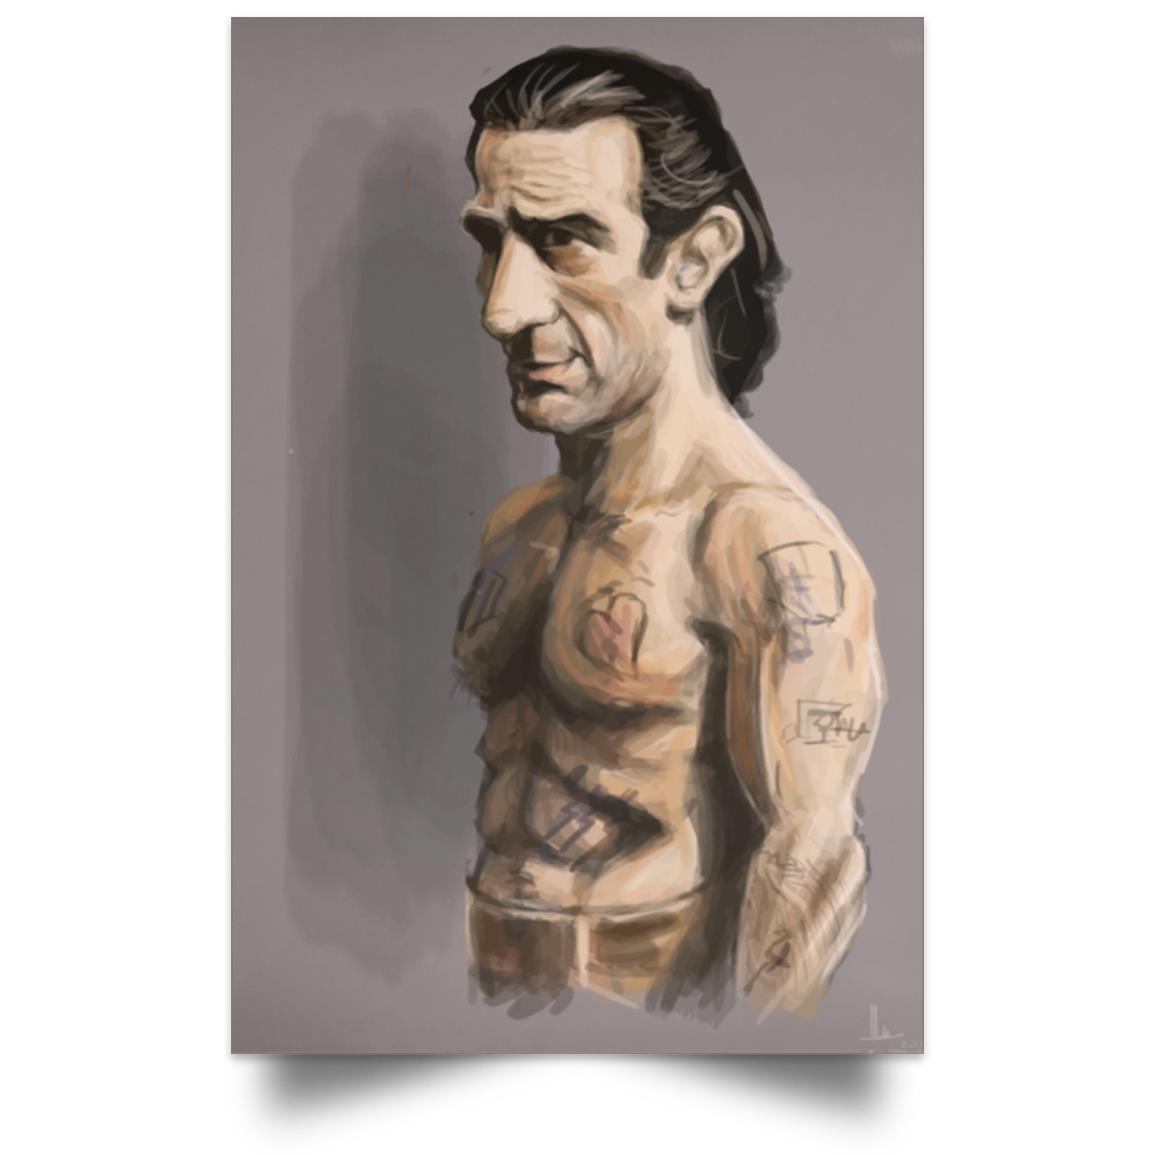 CAPE FEAR MAX CADY SUFFERING POSTER 1